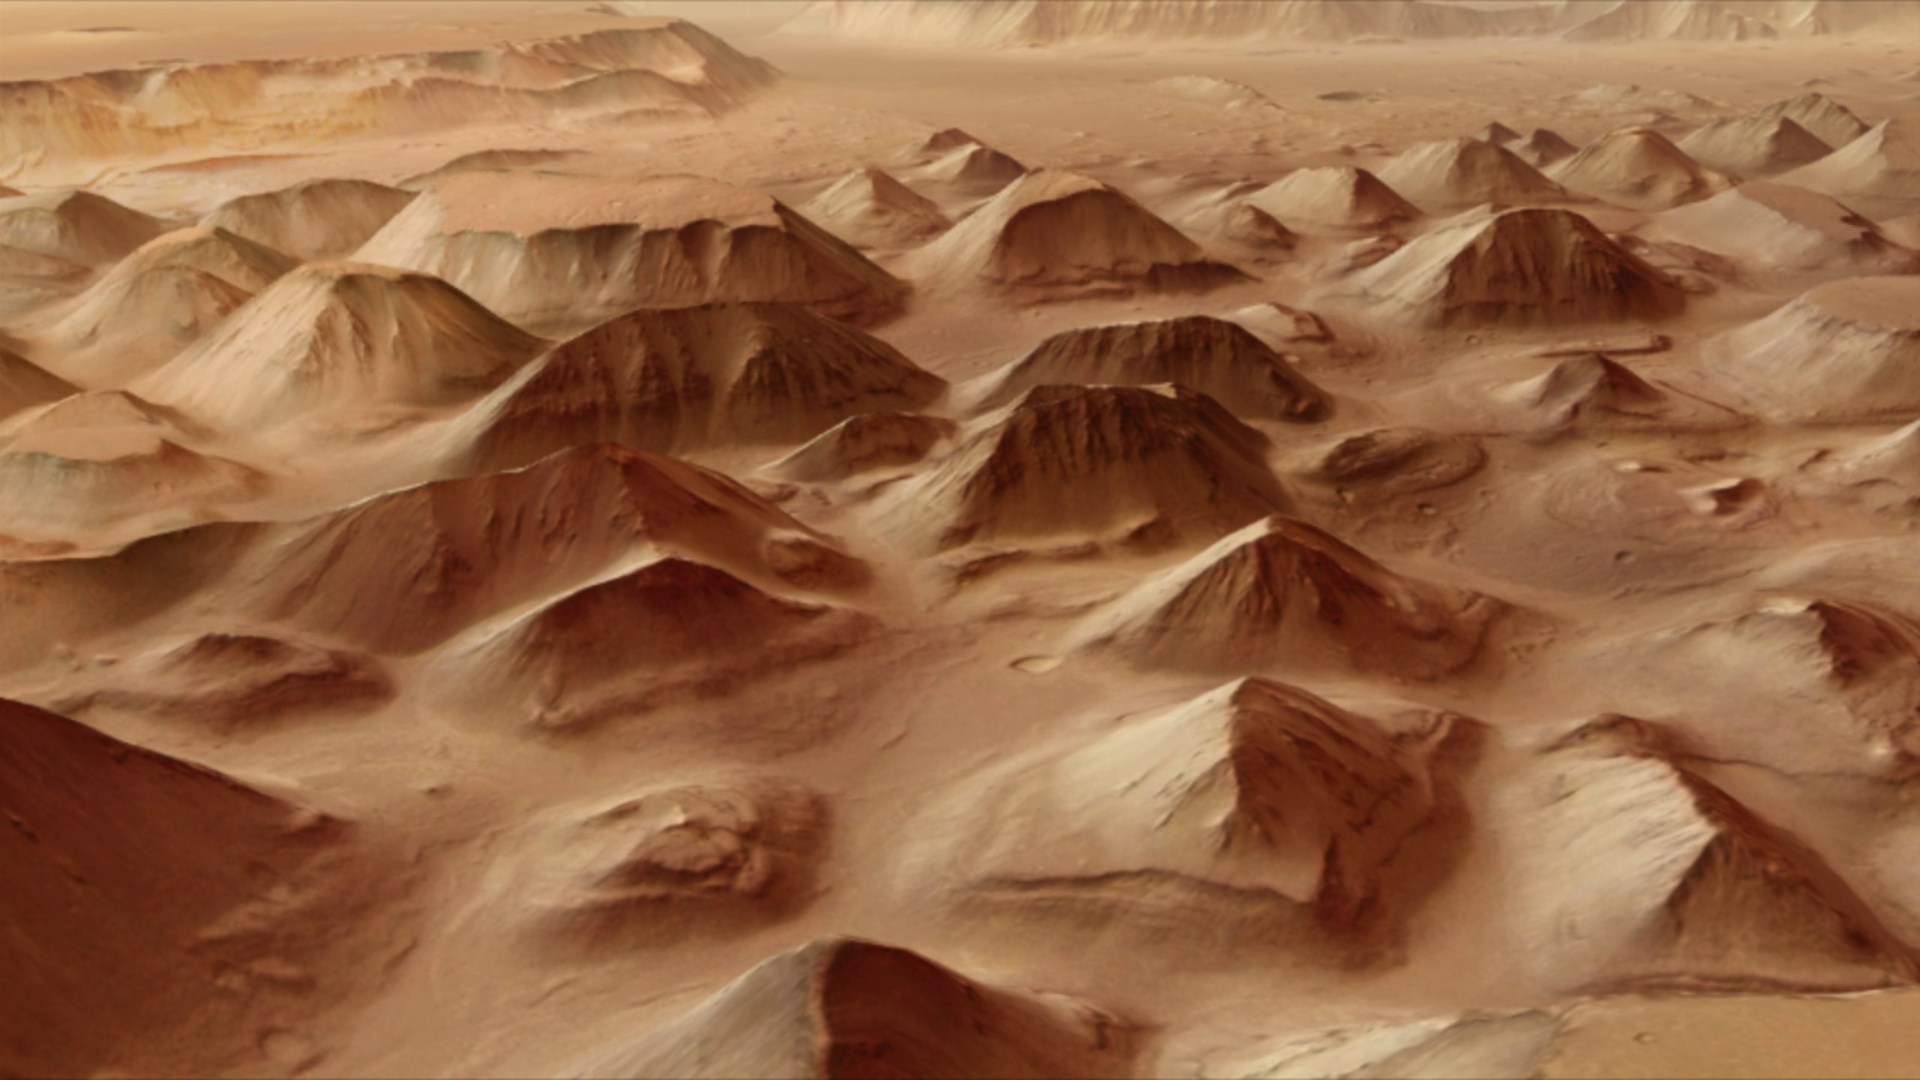 A mud lake on Mars might be hiding signs of life in chaotic terrain Space